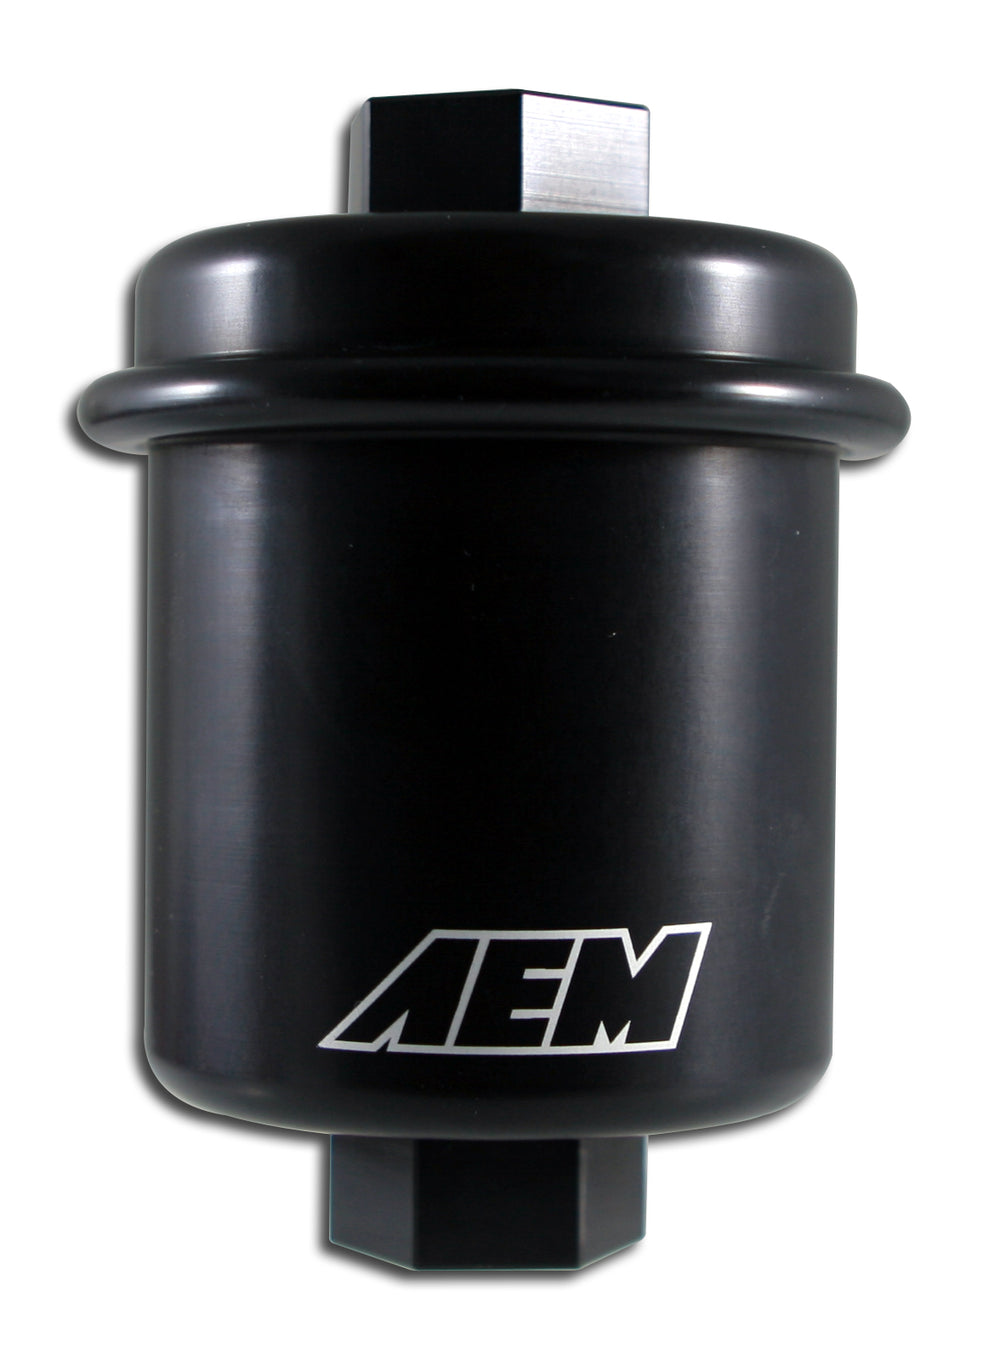 High Volume Fuel Filter, Black Anodized, Fits Acura & Honda, Inlet: 14mm X 1.5, Outlet: 12mm X 1.25